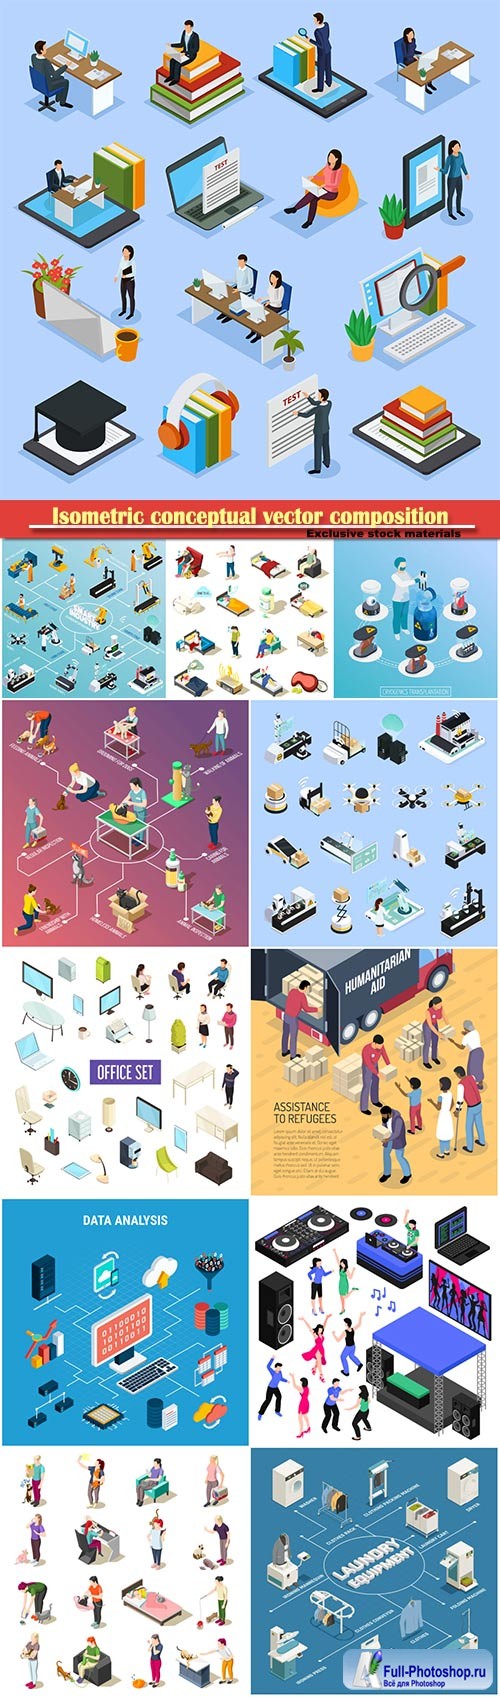 Isometric conceptual vector composition, infographics template, horizontal banners set # 5